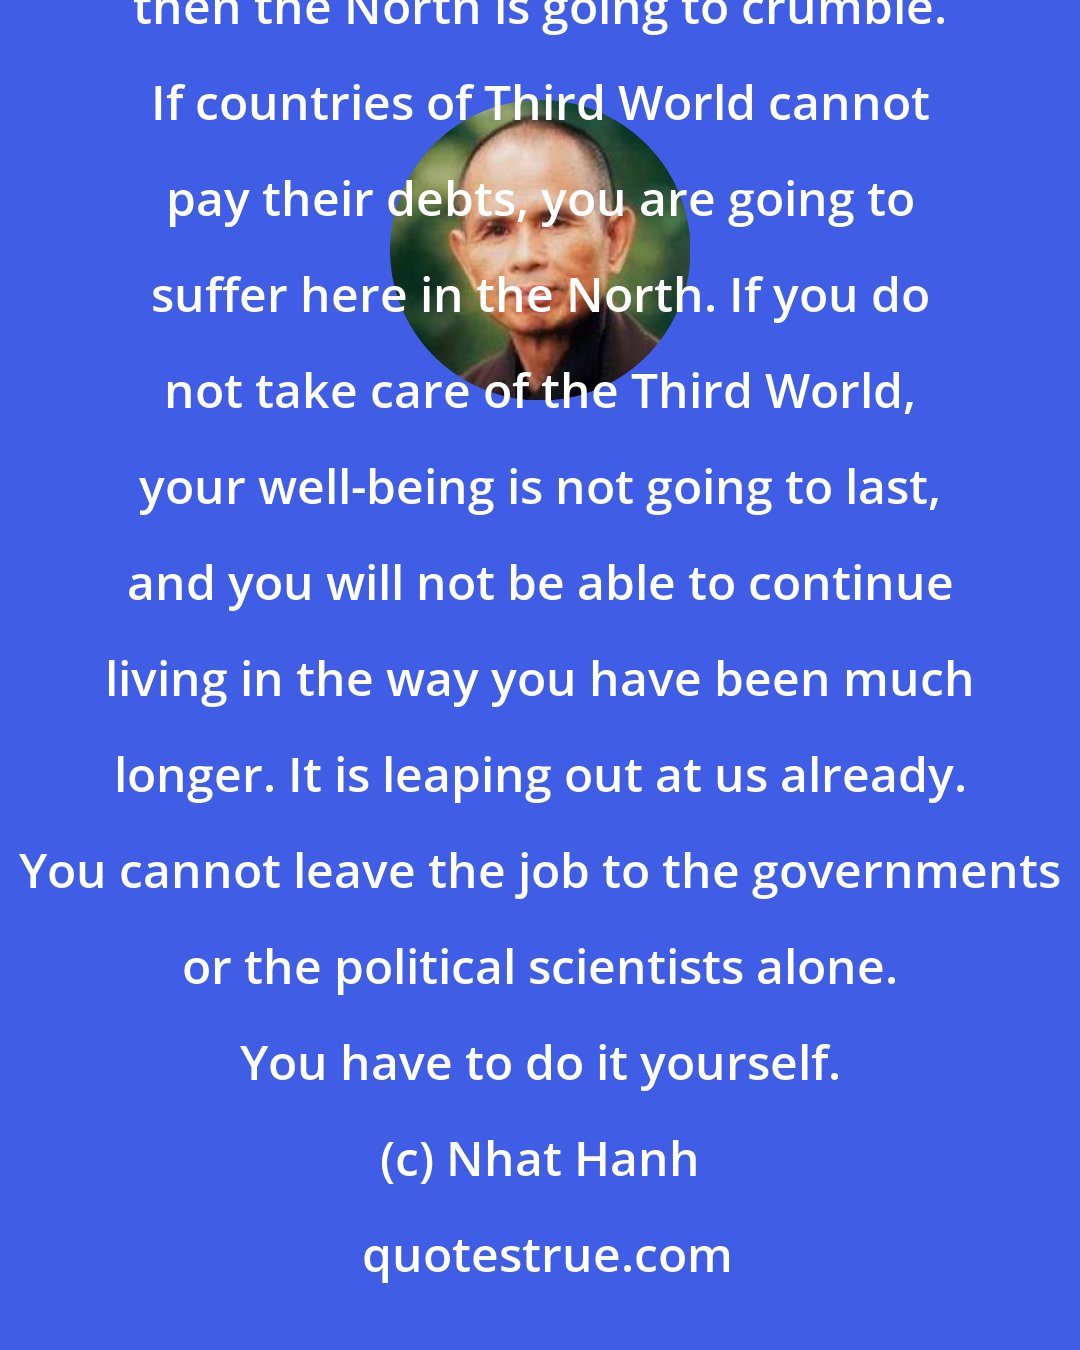 Nhat Hanh: Survival means the survival of human kind as a whole, not just a part of it. If the South cannot survive, then the North is going to crumble. If countries of Third World cannot pay their debts, you are going to suffer here in the North. If you do not take care of the Third World, your well-being is not going to last, and you will not be able to continue living in the way you have been much longer. It is leaping out at us already. You cannot leave the job to the governments or the political scientists alone. You have to do it yourself.